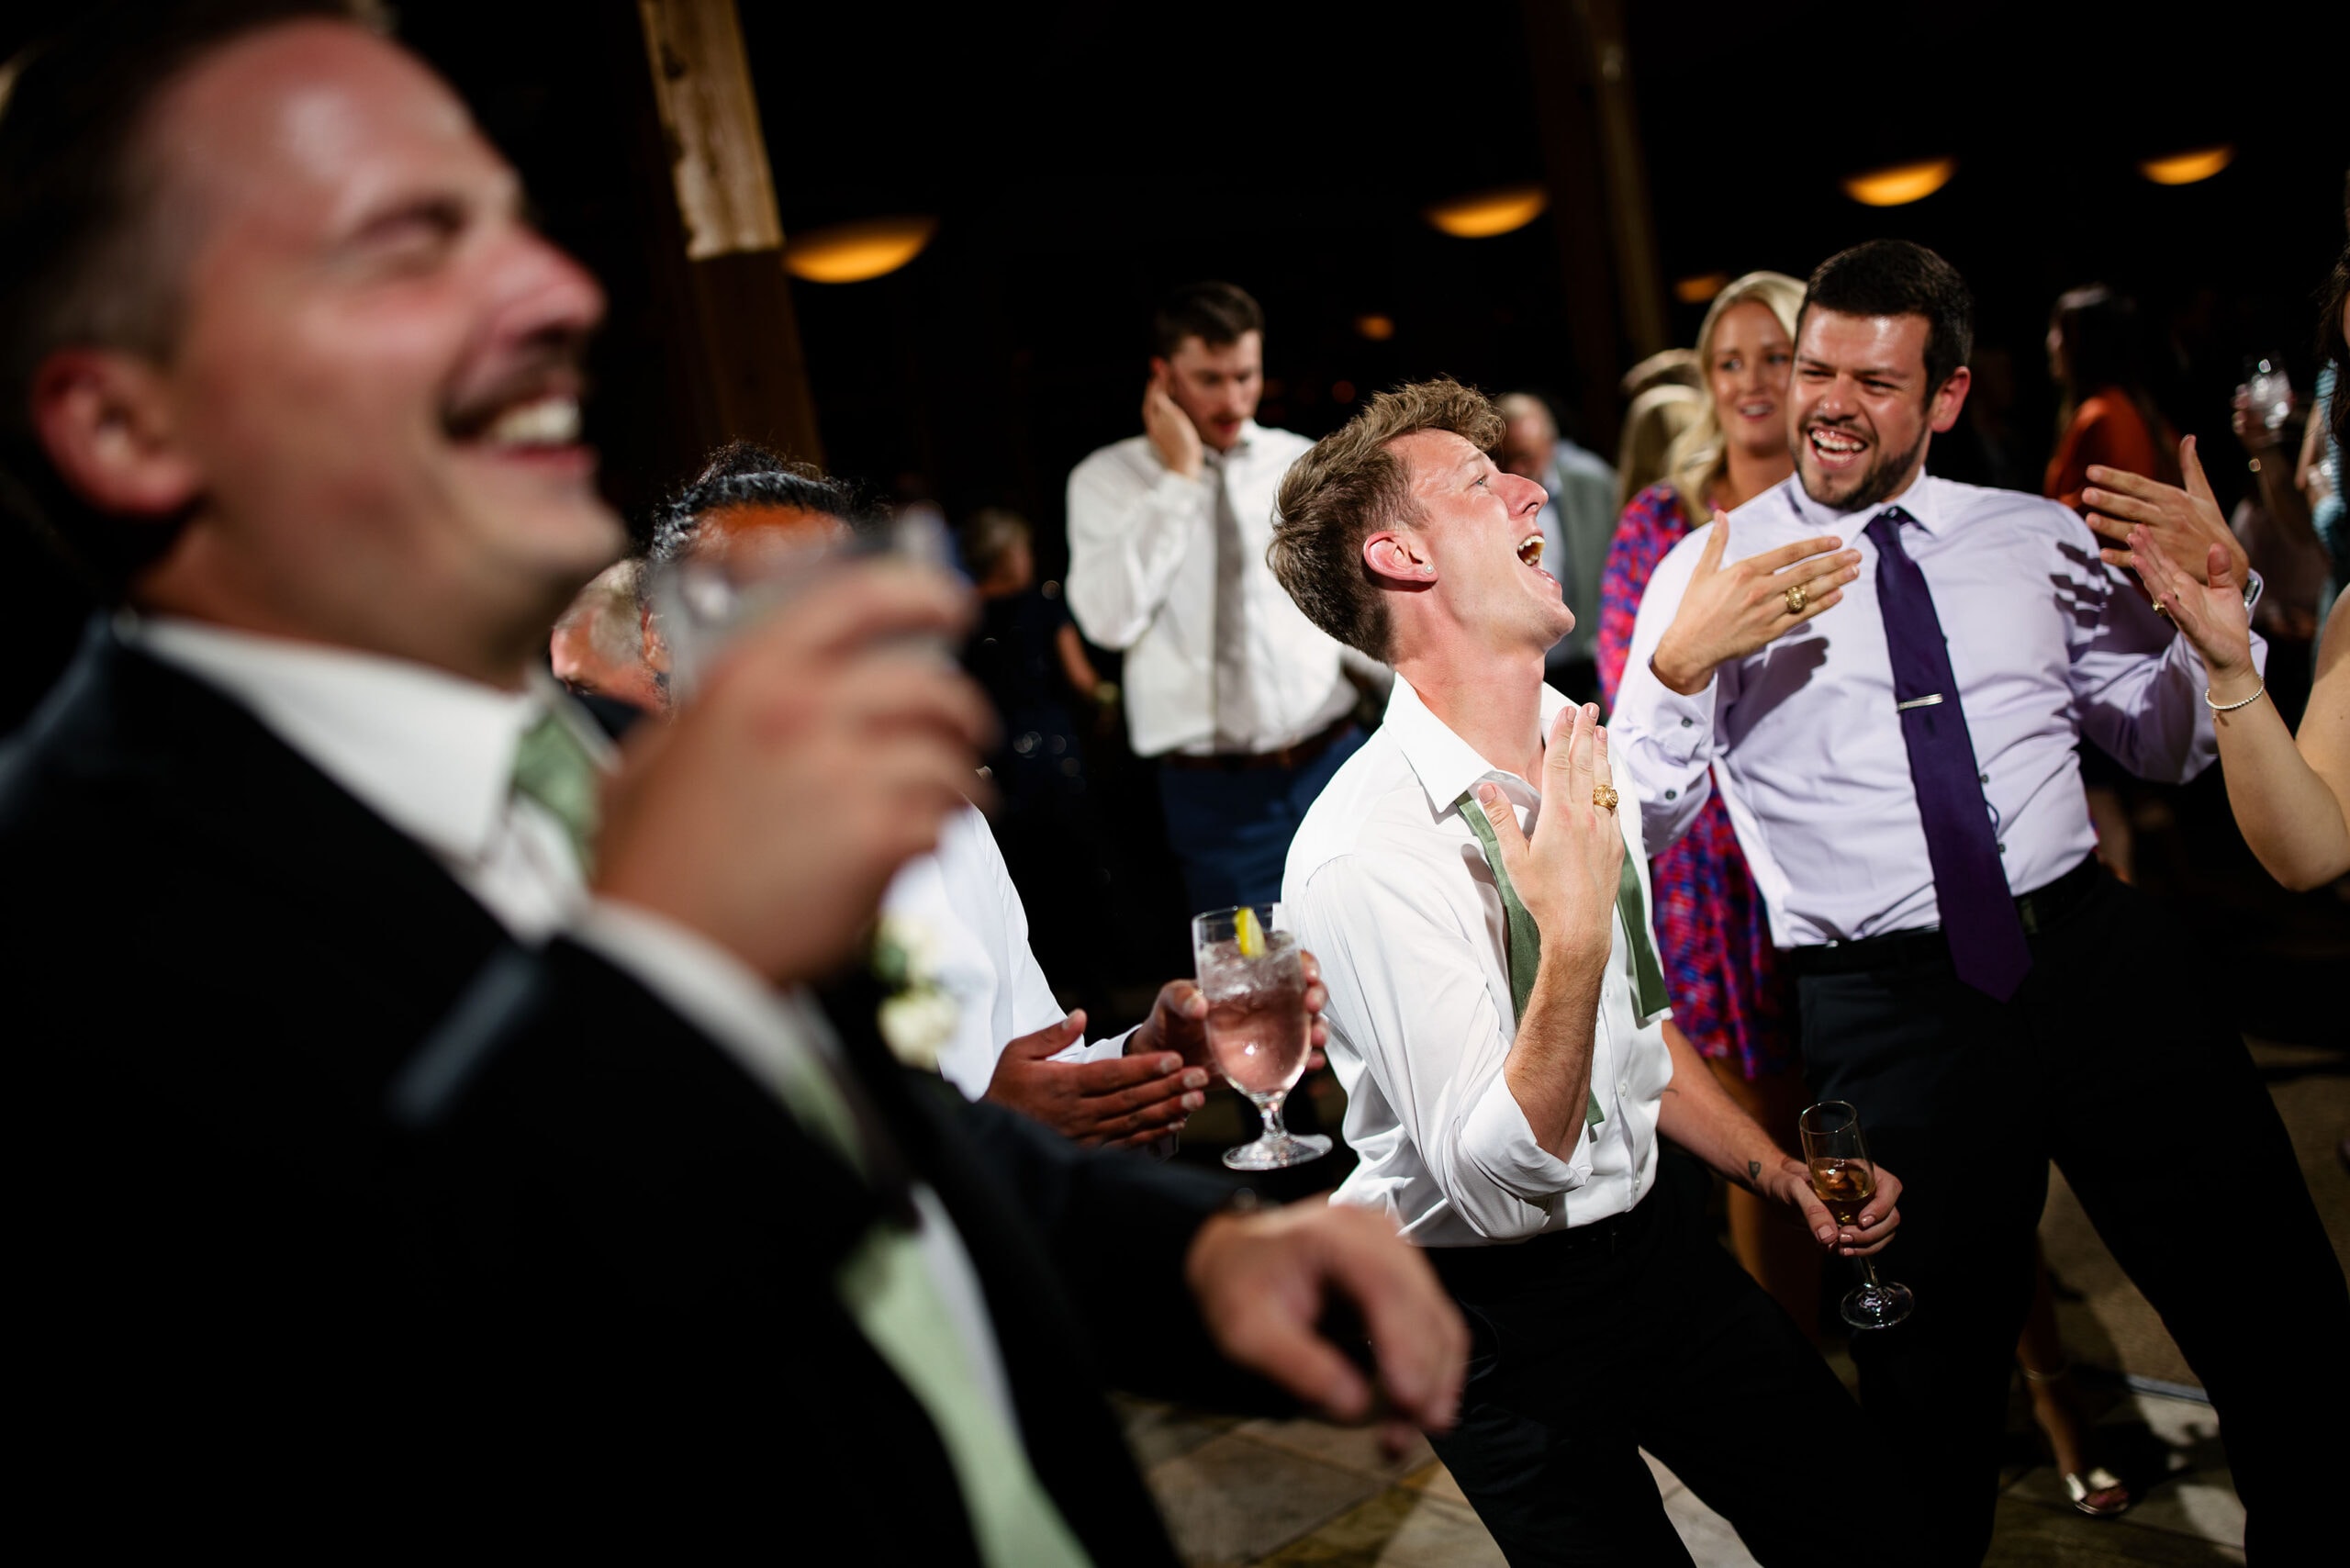 Guests dance during a wedding reception at Black Mountain Lodge